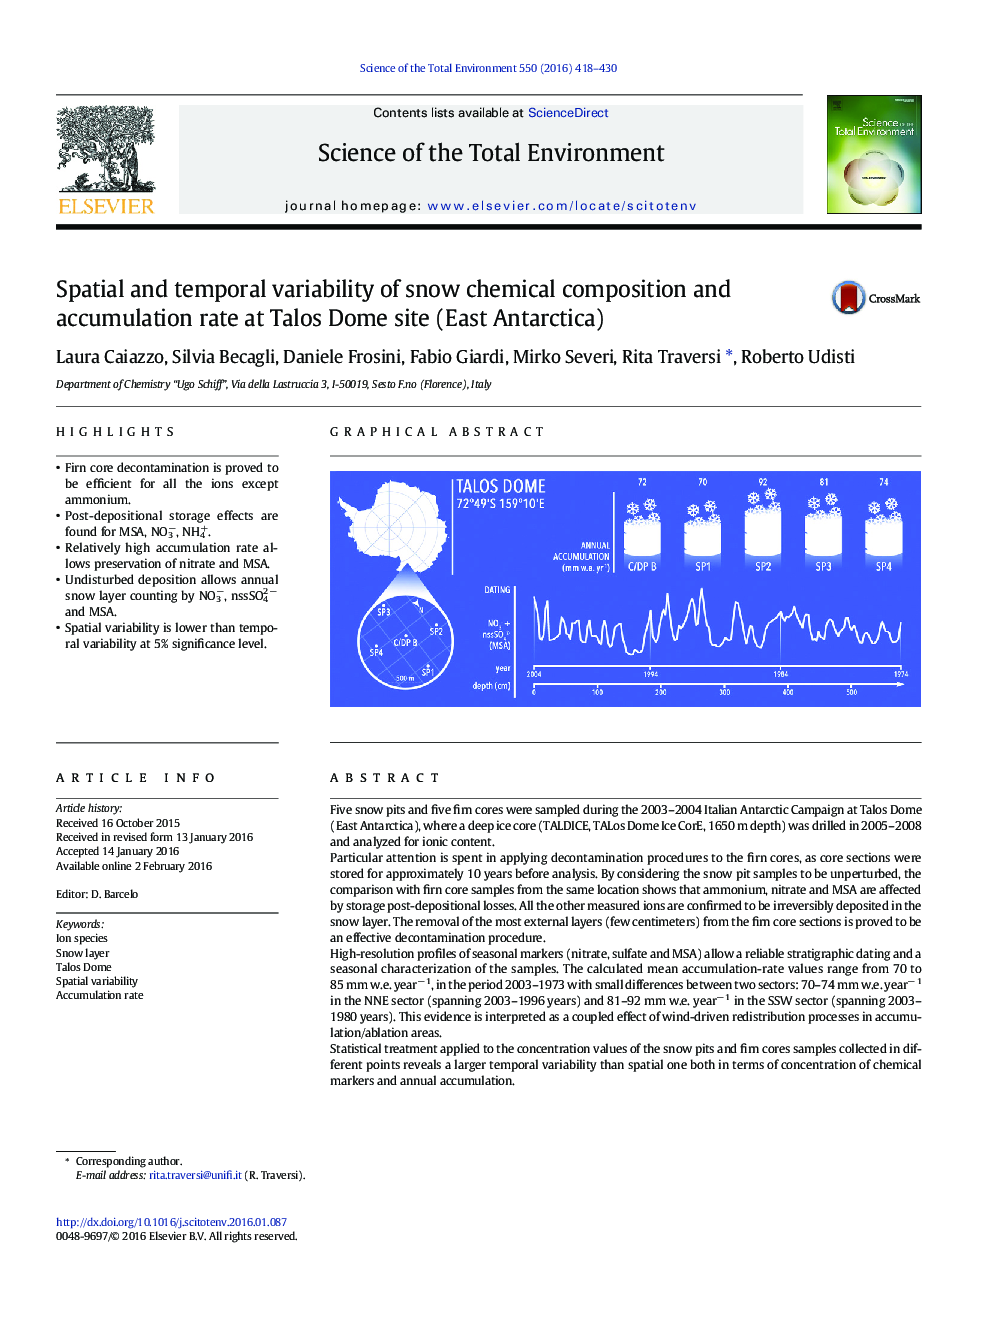 Spatial and temporal variability of snow chemical composition and accumulation rate at Talos Dome site (East Antarctica)